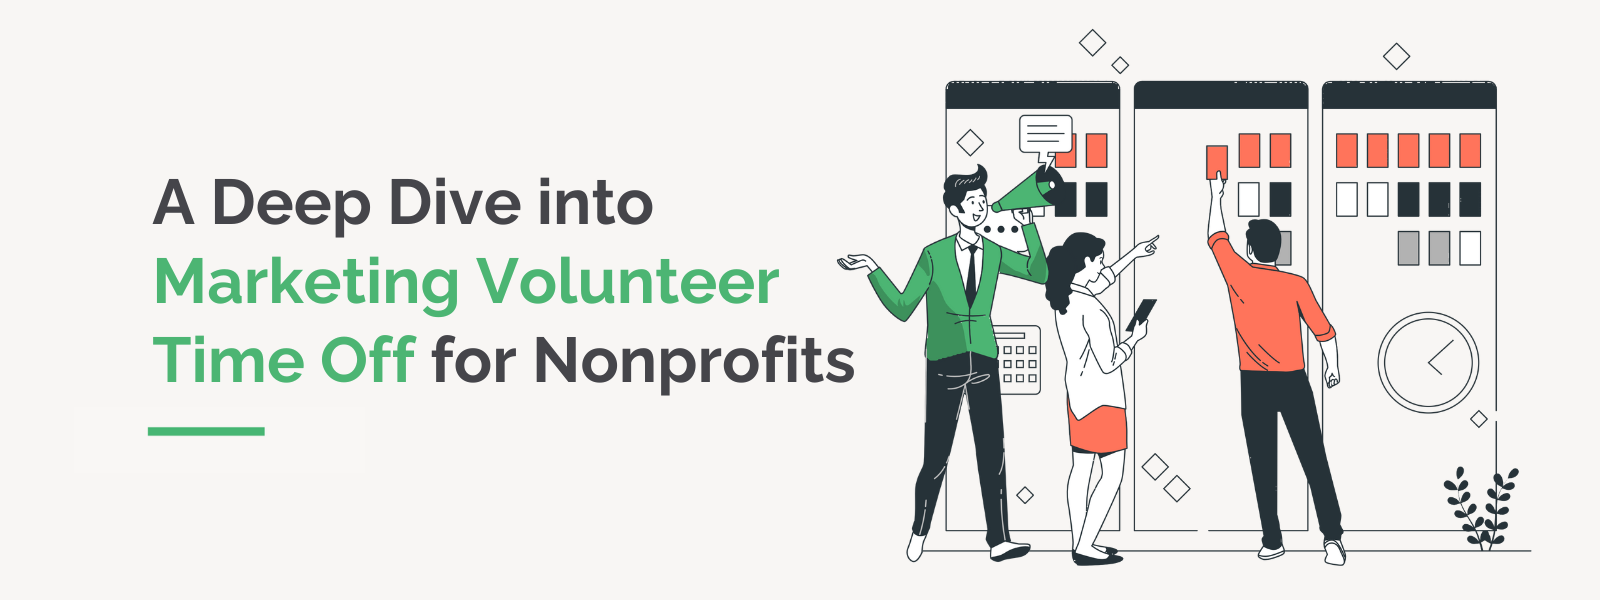 A Deep Dive into Marketing Volunteer Time Off for Nonprofits